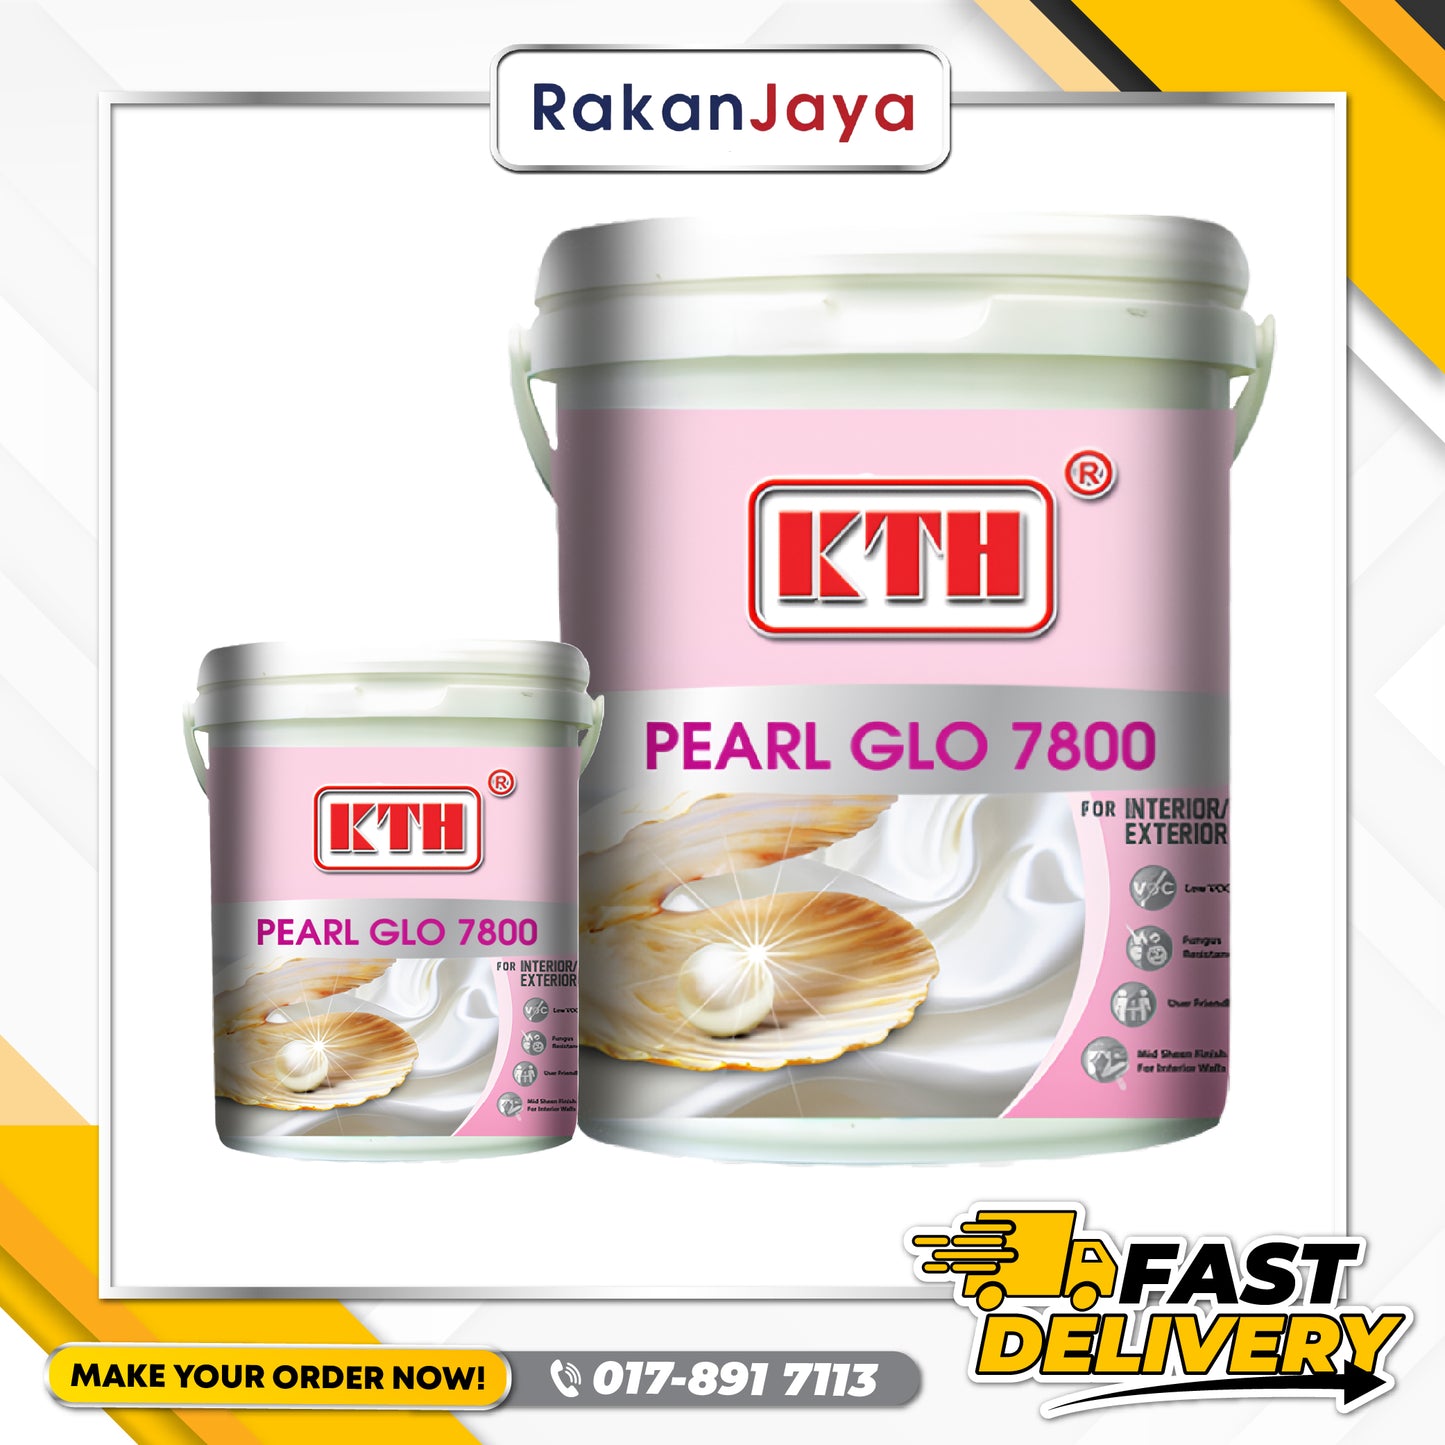 KTH PEARL GLO 7800 (WALL PAINT)